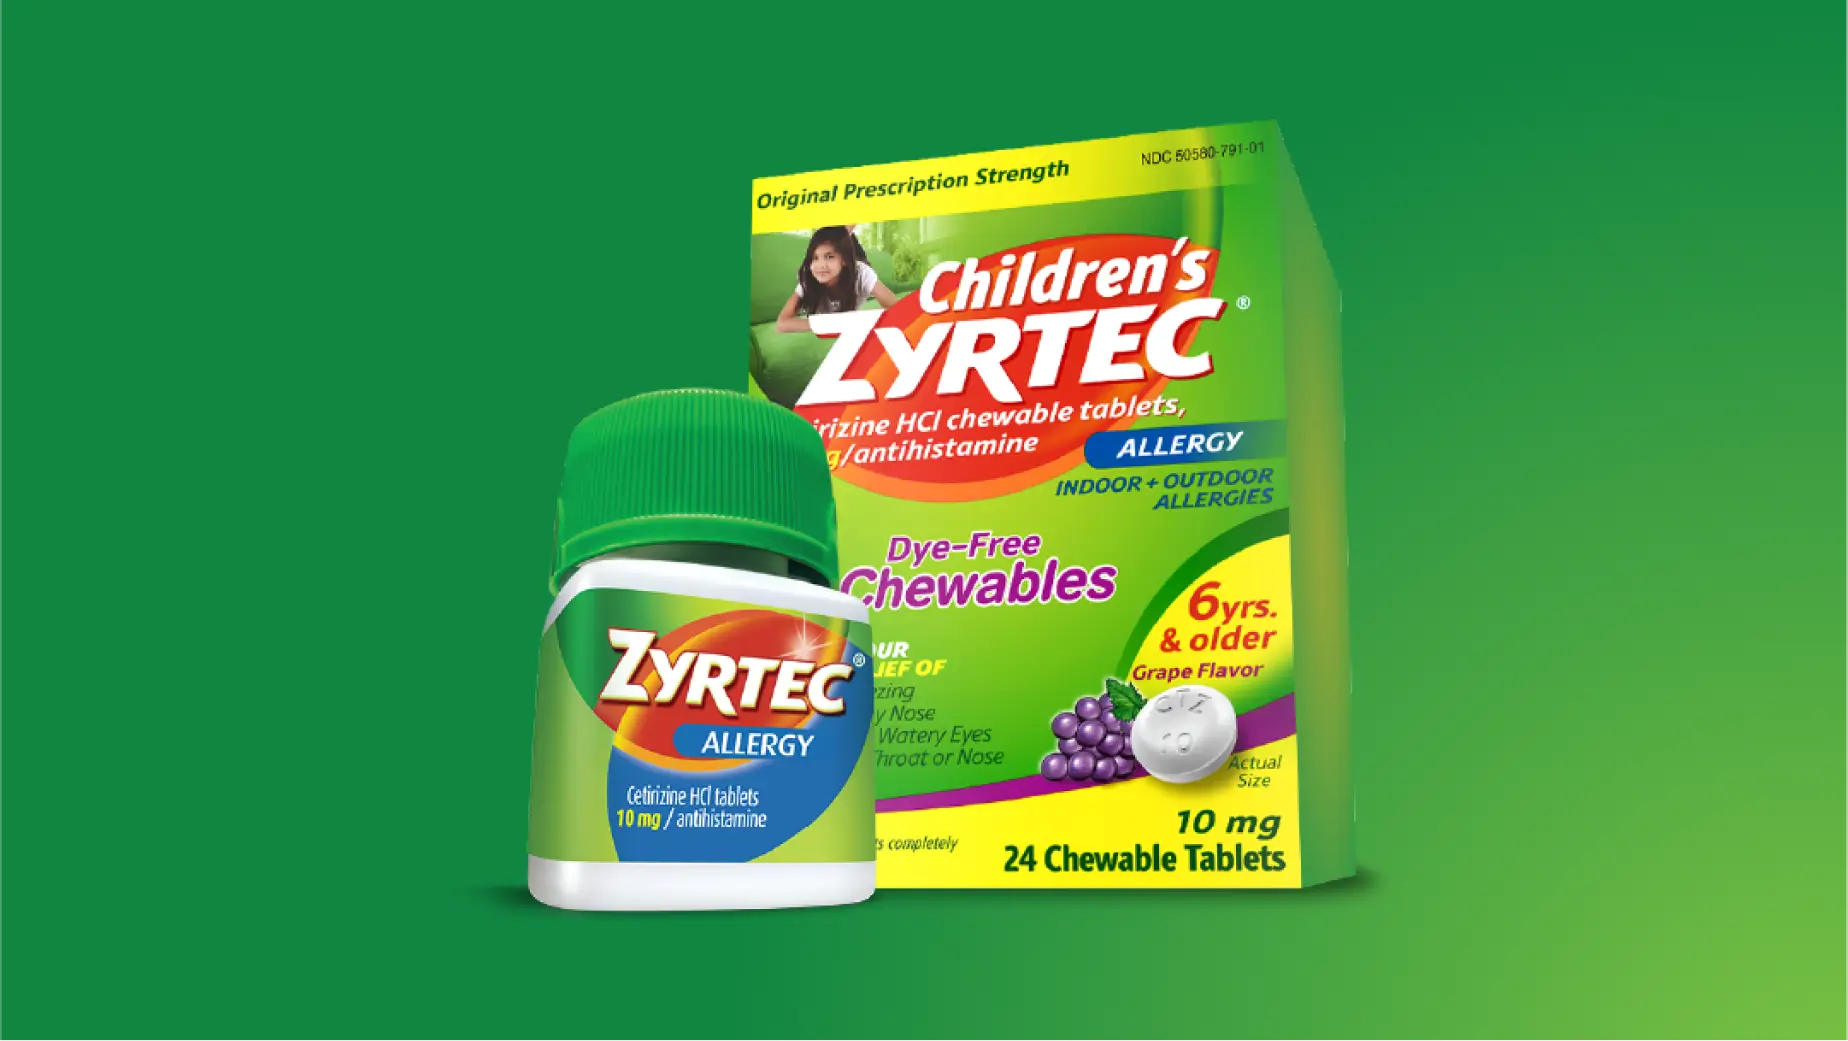 ZYRTEC® tablets bottle and Children’s ZYRTEC® Chewables package